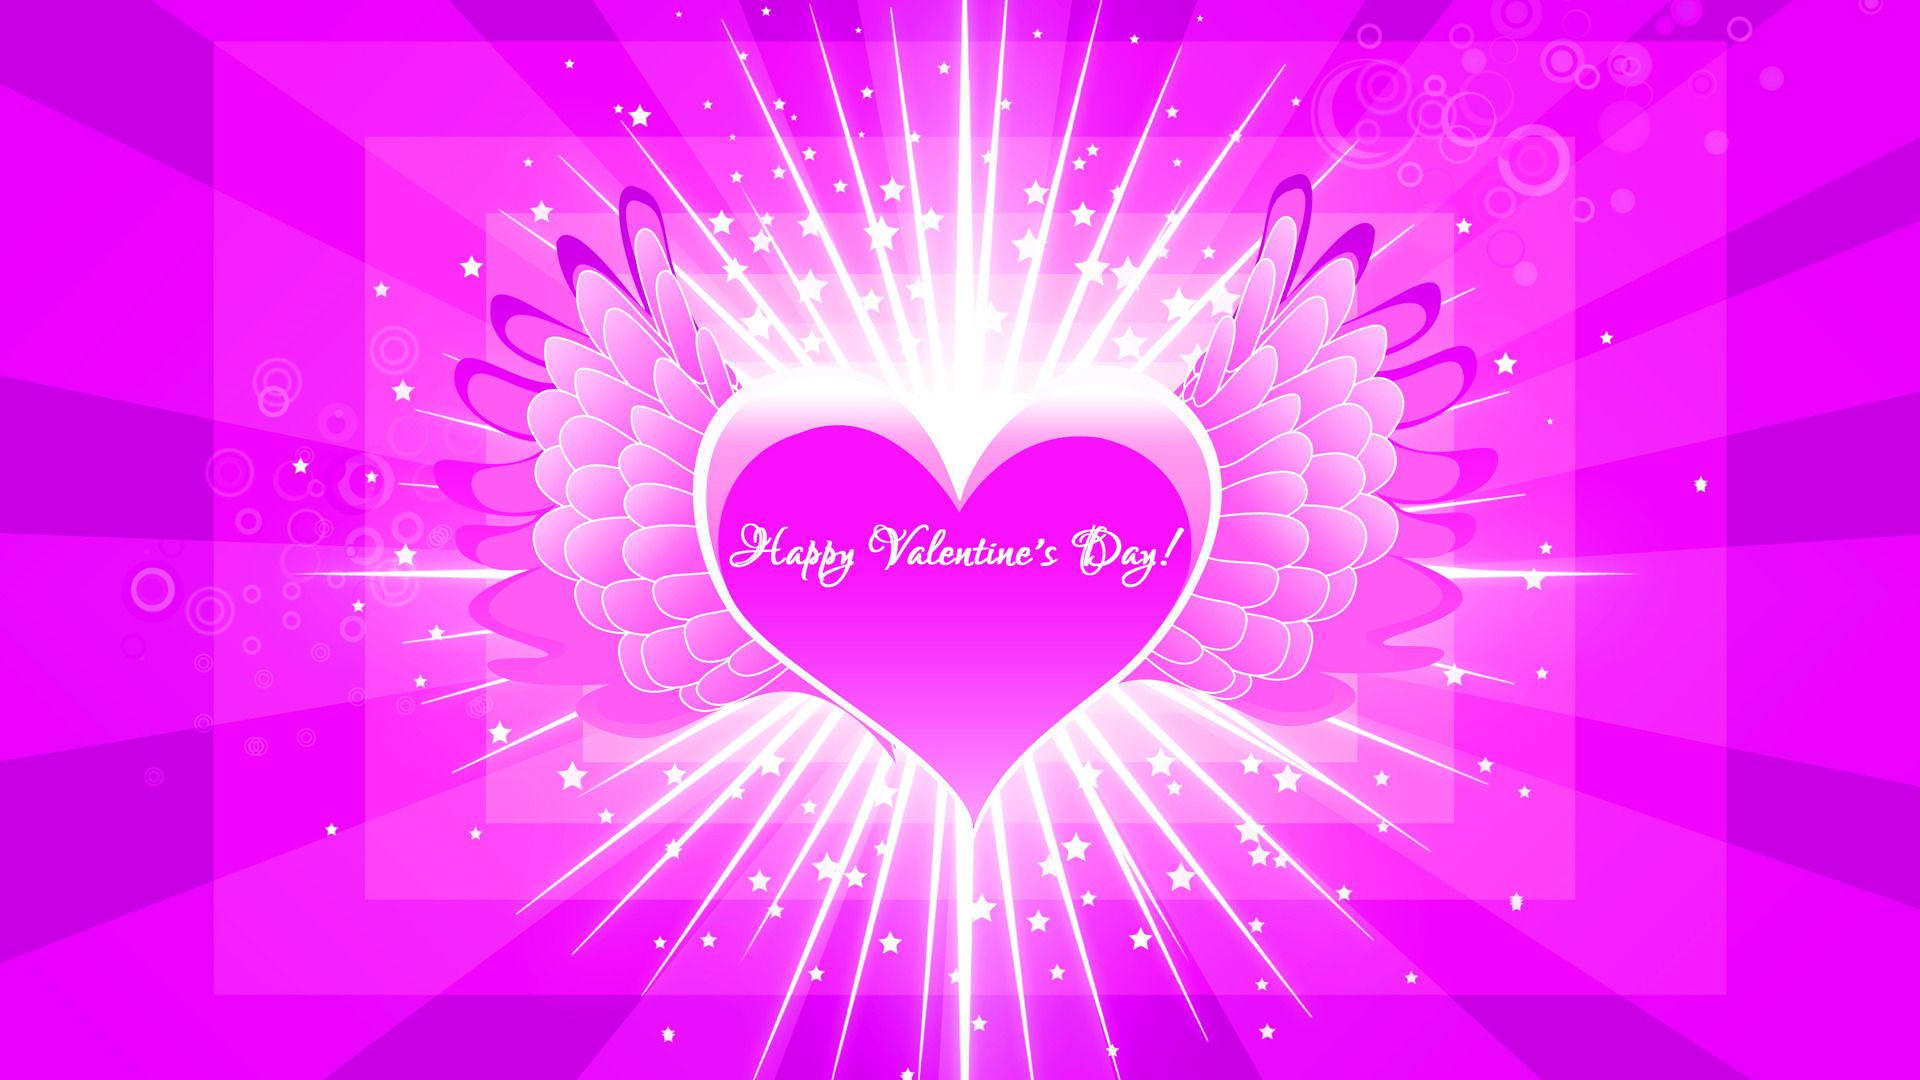 Pink Heart Hd Wallpaper Free Valentines Day. Happy Valentines Day Image, Valentines Wallpaper, Happy Valentines Day